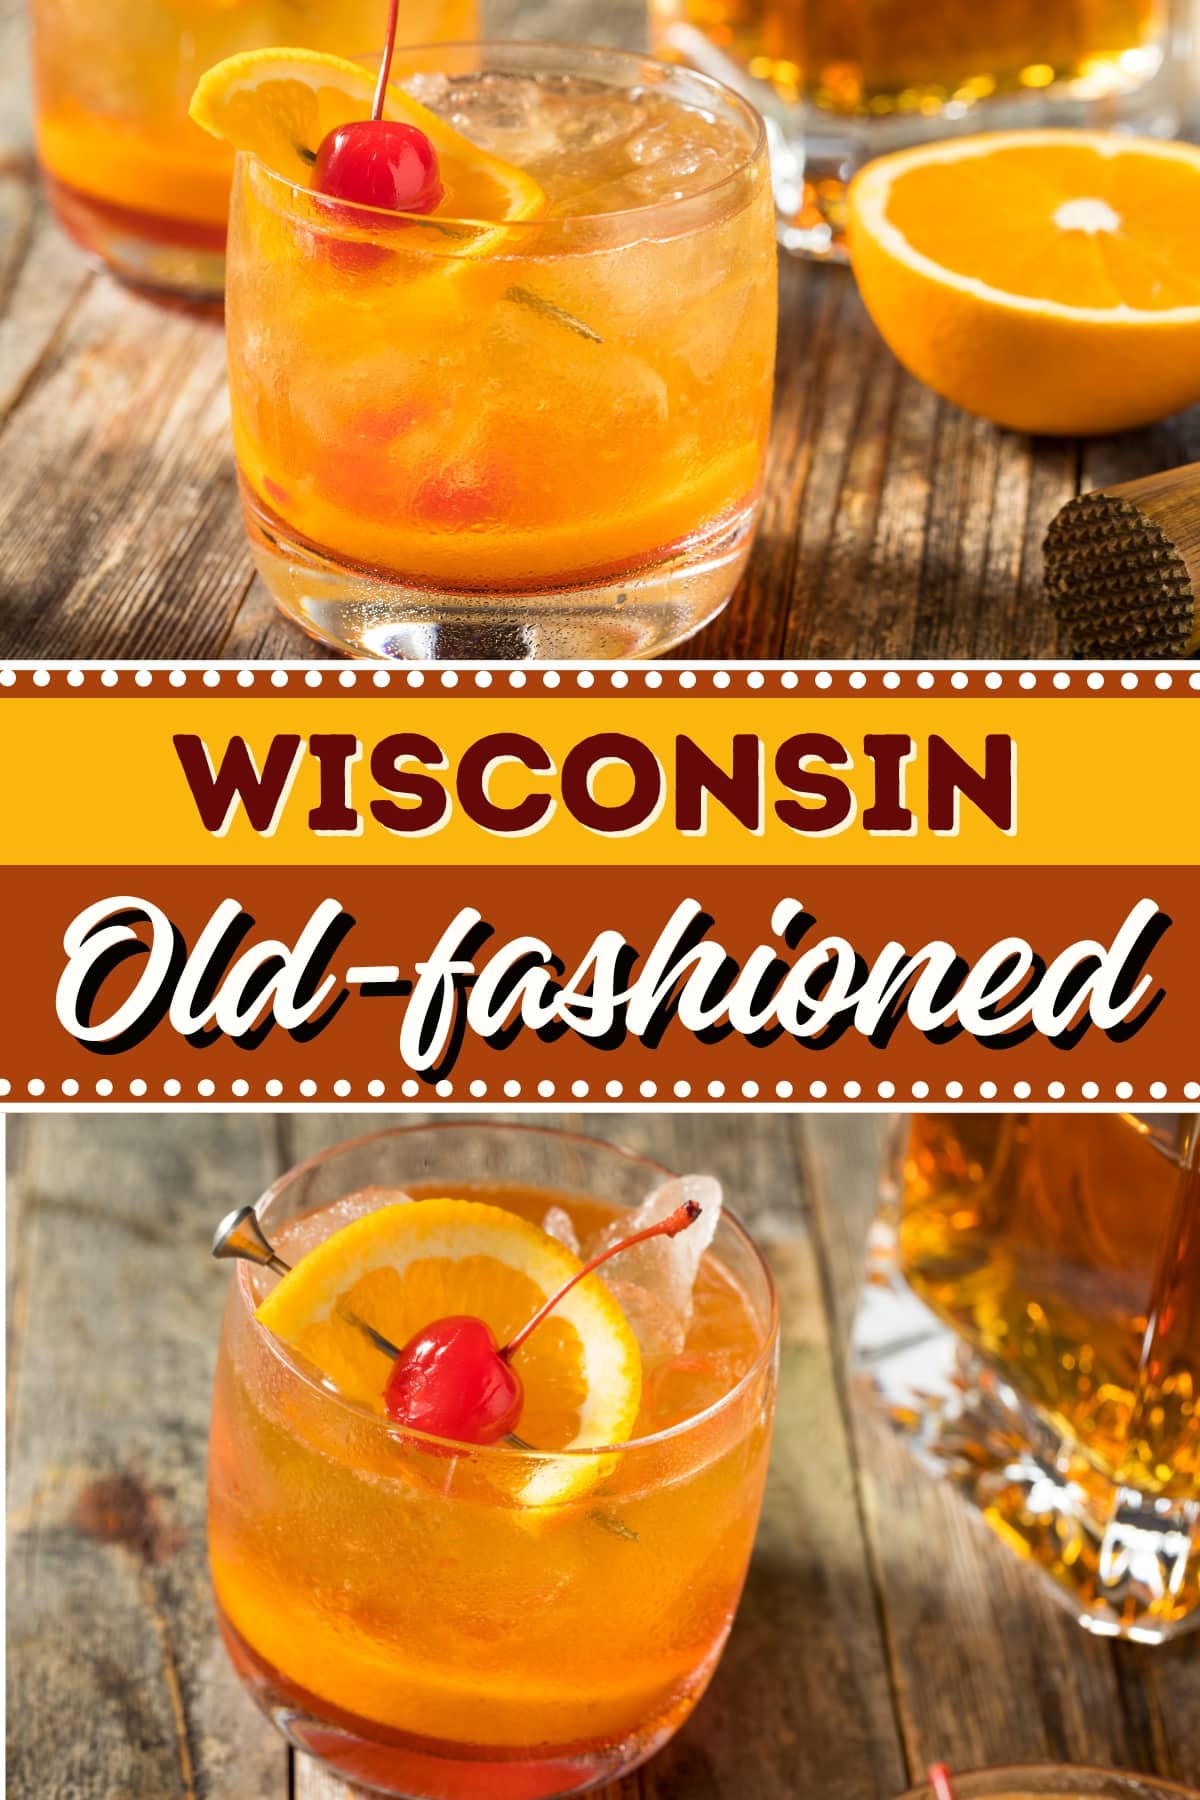 Winconsin Old-fashioned  Cocktail